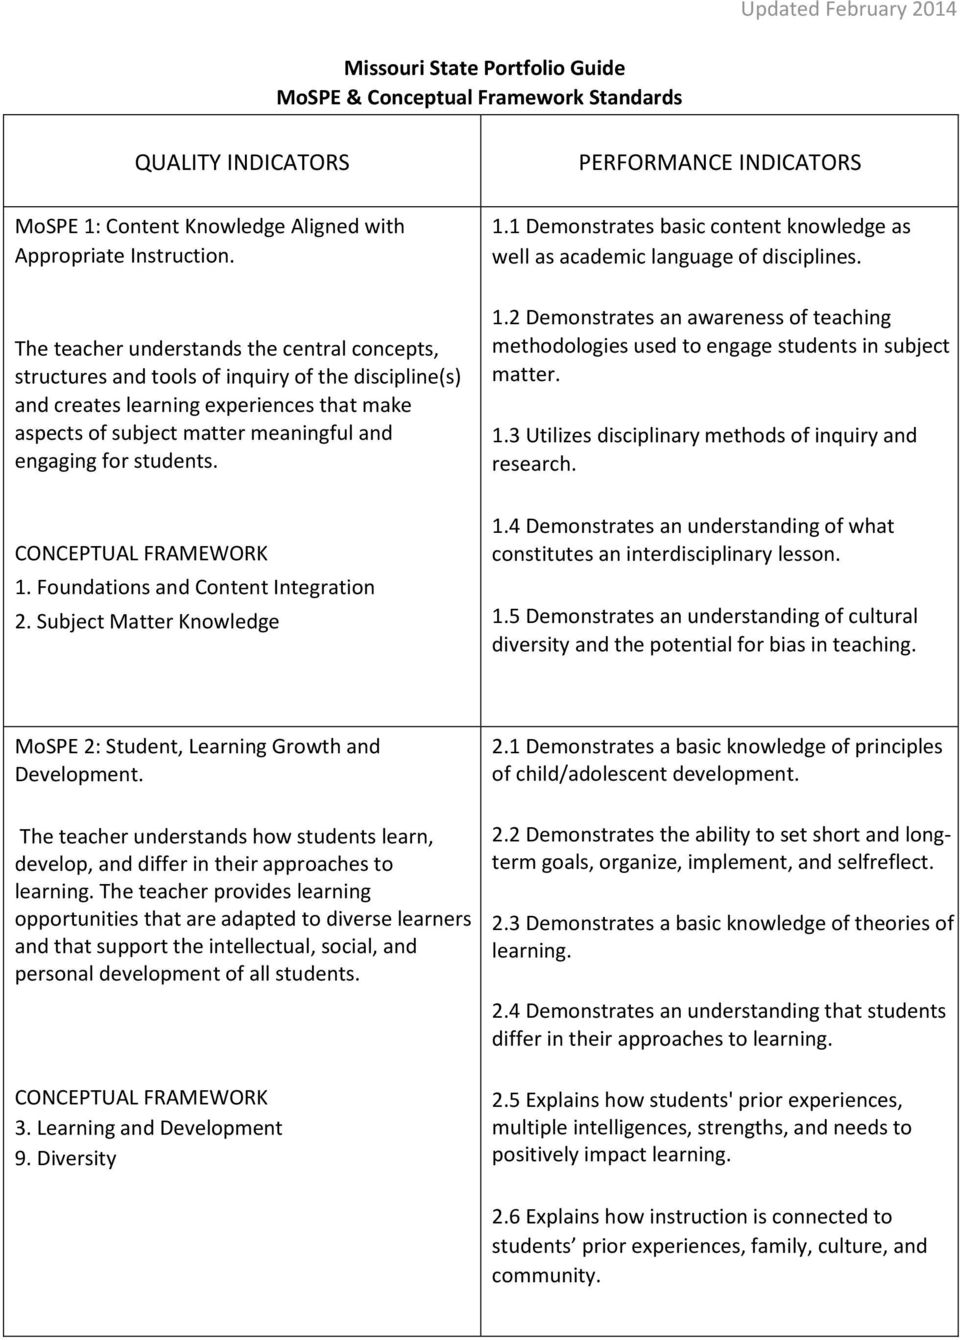 students. PERFORMANCE INDICATORS 1.1 Demonstrates basic content knowledge as well as academic language of disciplines. 1.2 Demonstrates an awareness of teaching methodologies used to engage students in subject matter.